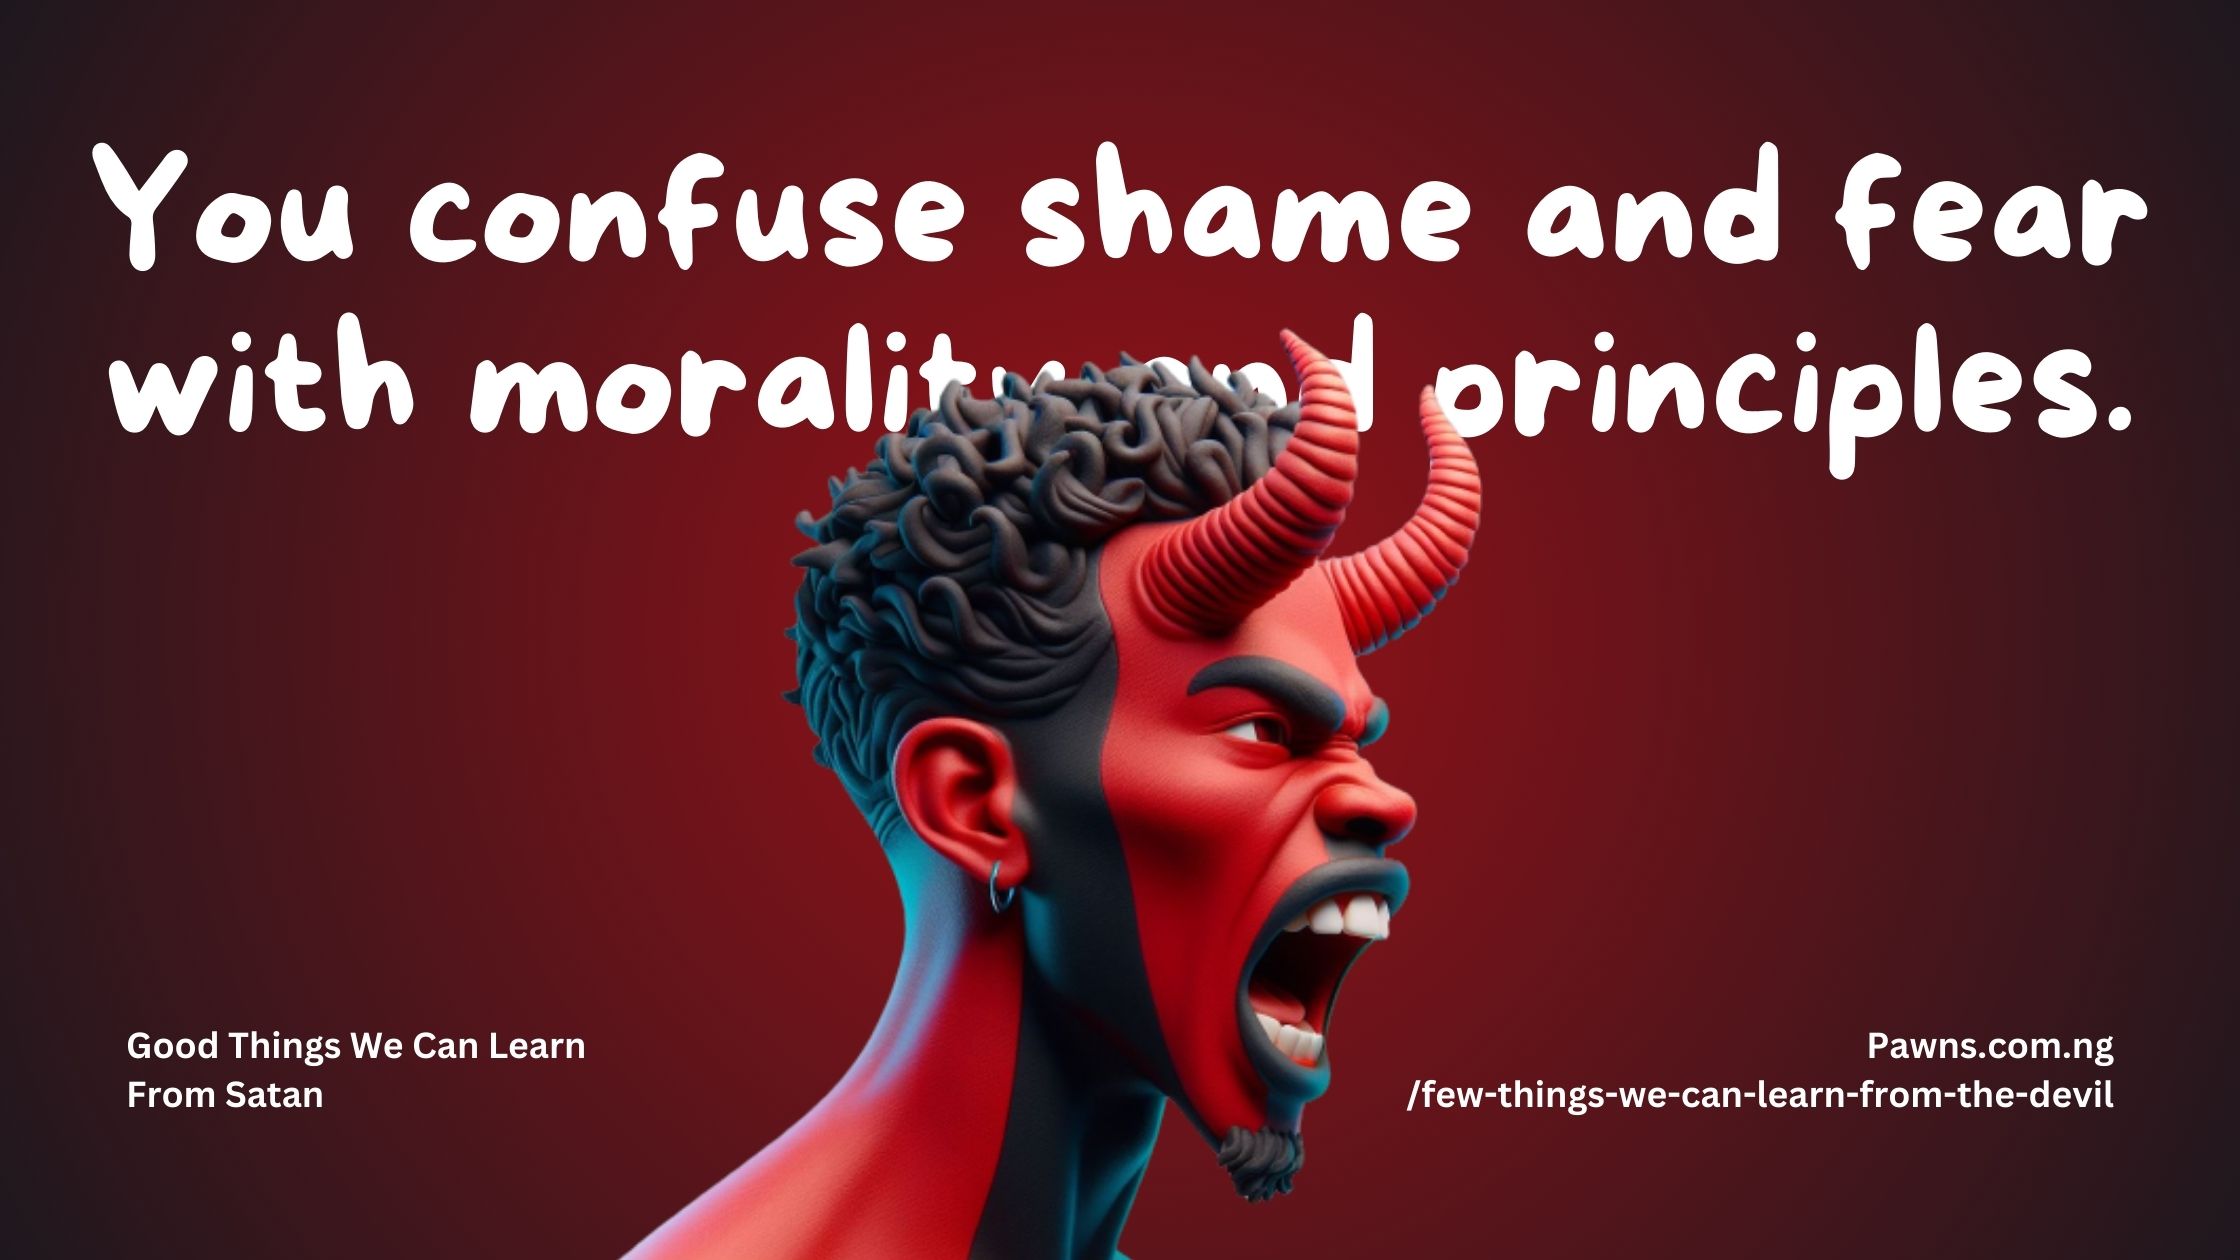 Good Things We Can Learn From Satan You confuse shame and fear for morality and principles.